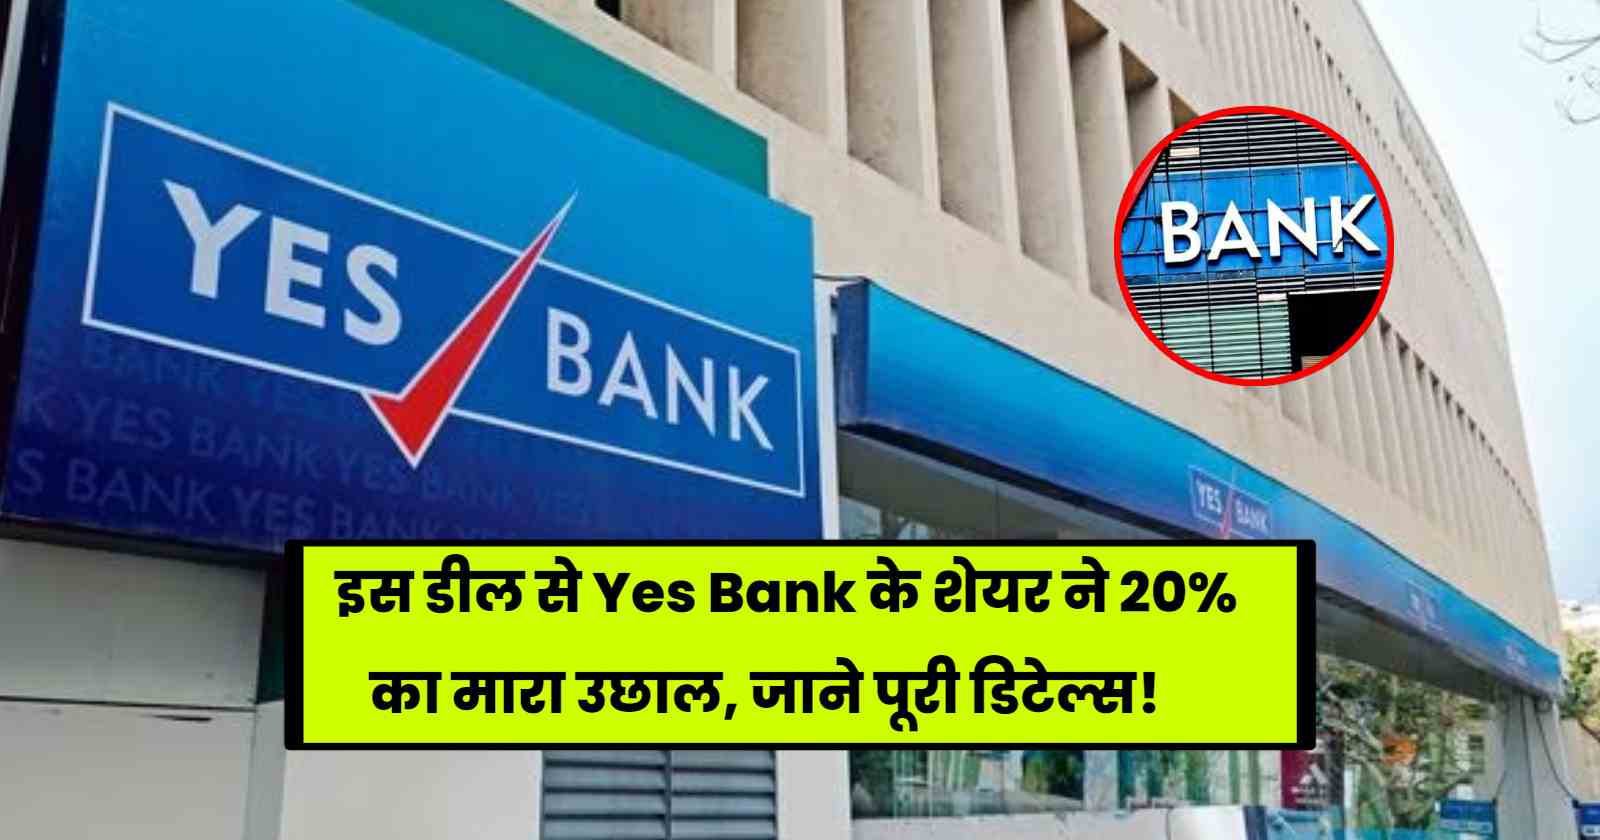 Yes Bank Share Deal Details